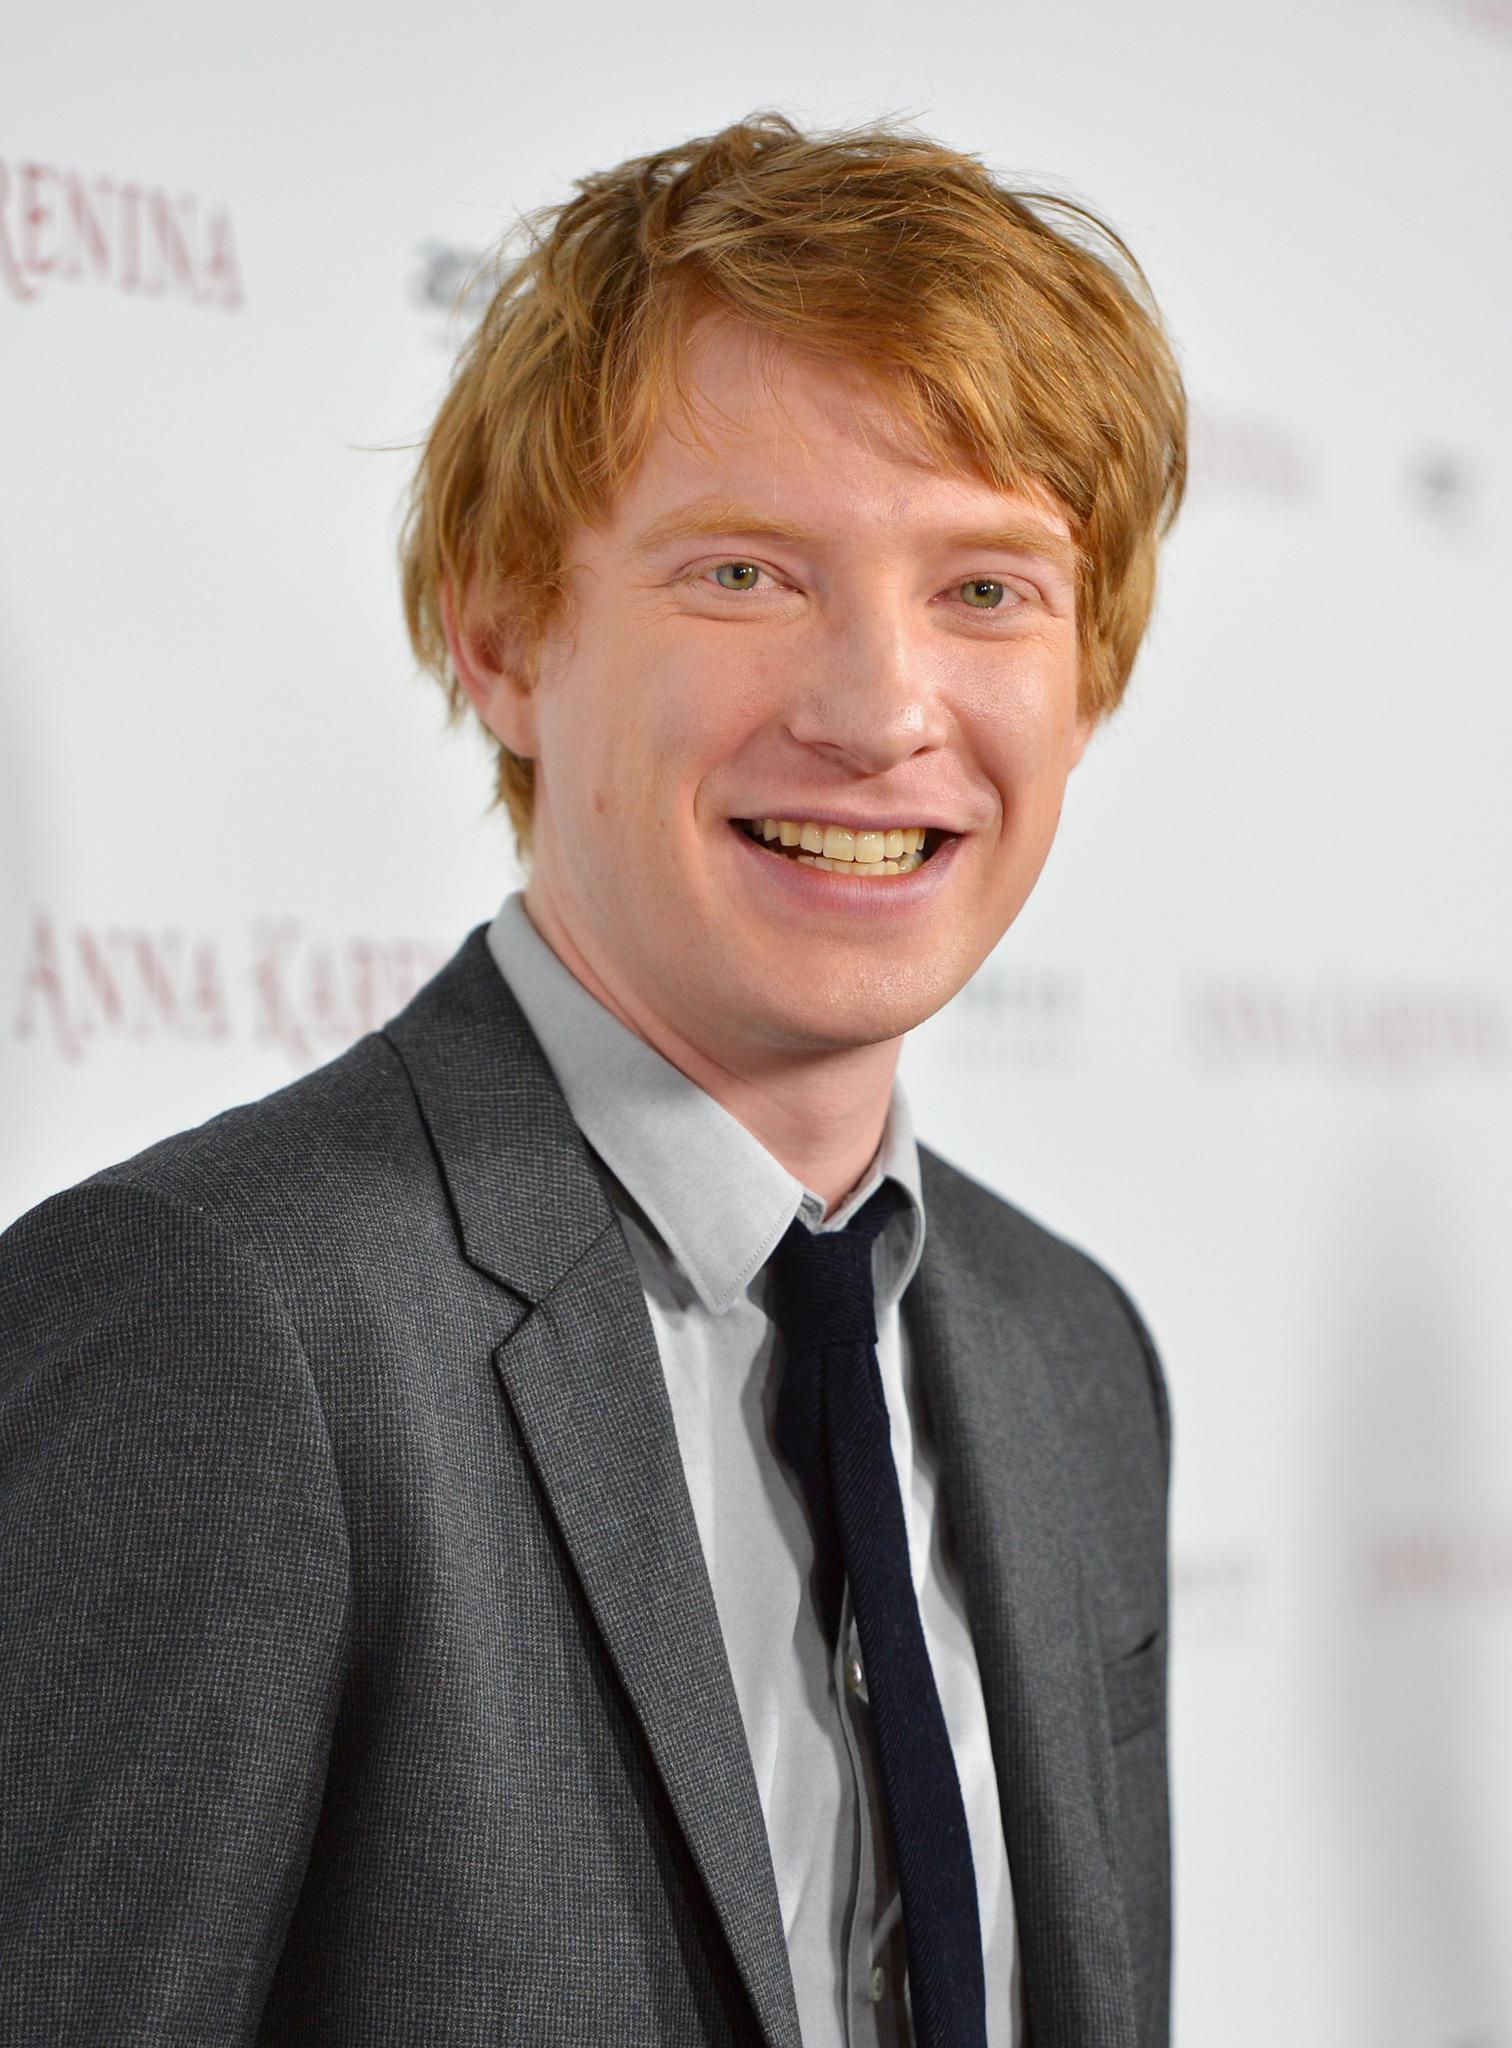 Domhnall Gleeson played Bill Weasley in Harry Potter and the Deathly Hallows